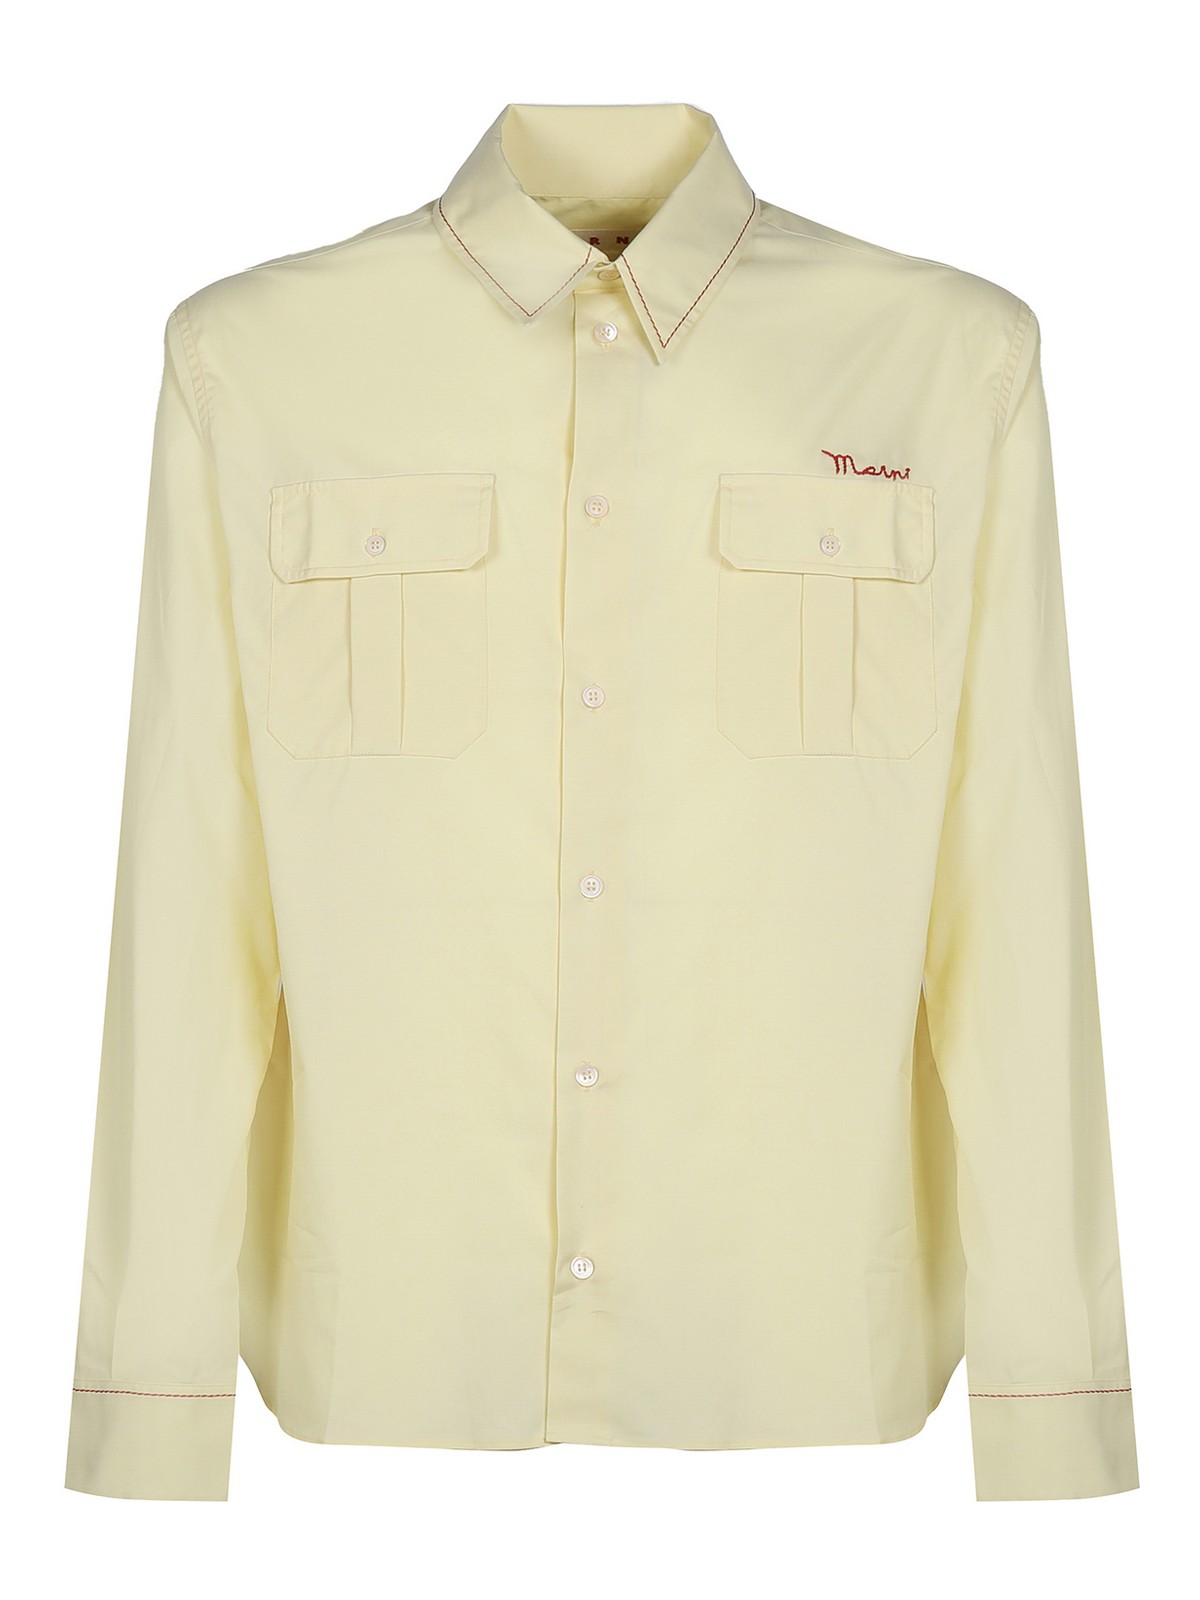 Marni Cotton Shirt With Embroidery In Yellow